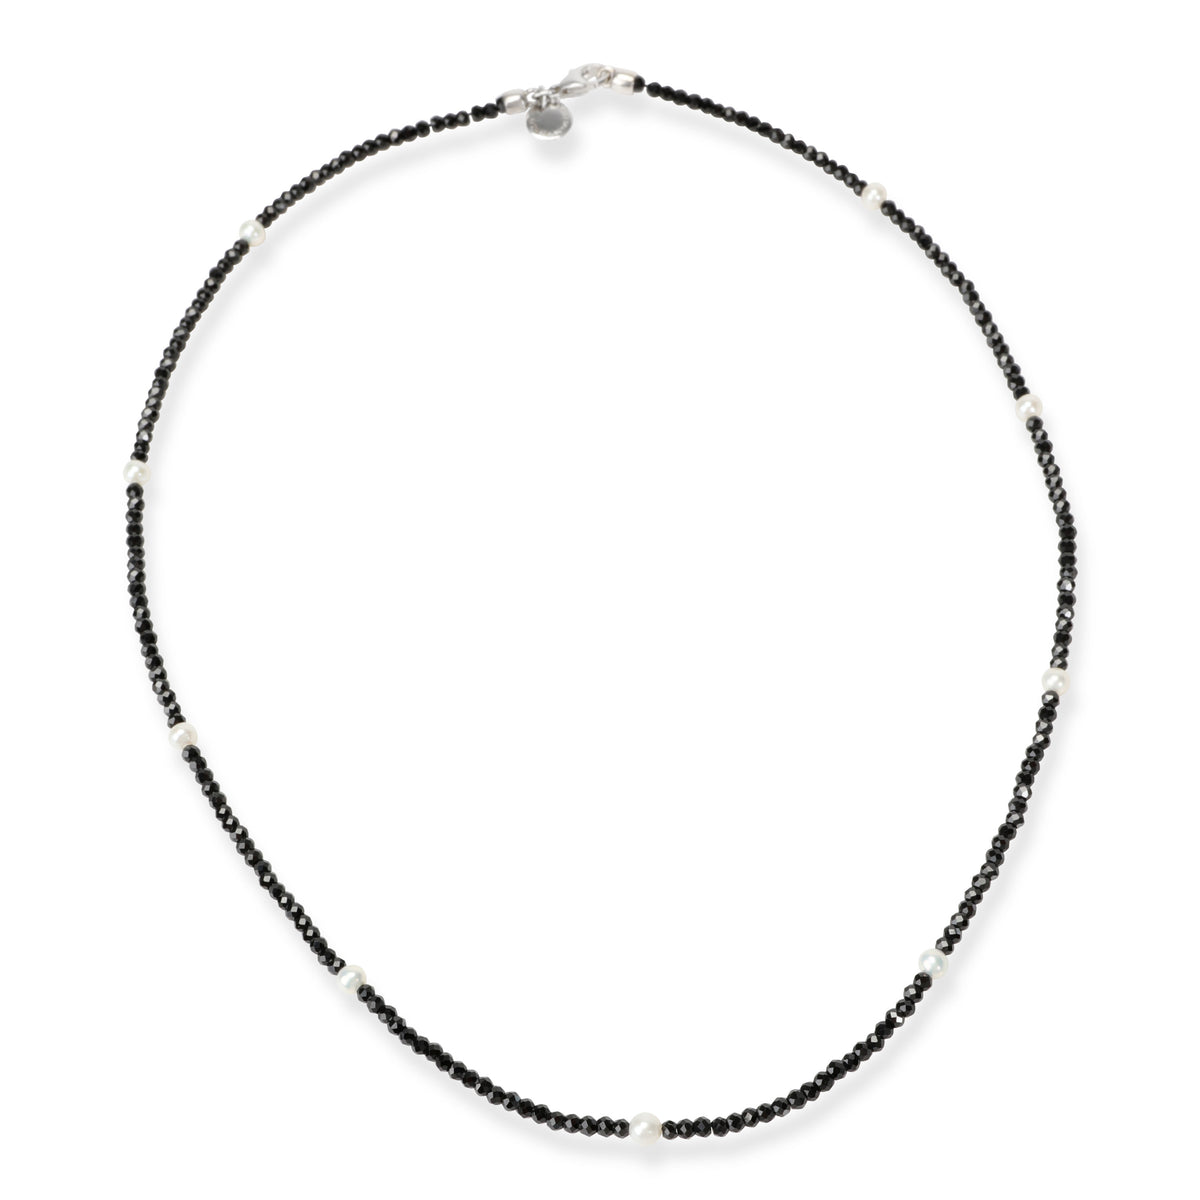 Tiffany Faceted Black Spinel & Freshwater Pearl Necklace in Sterling Silver